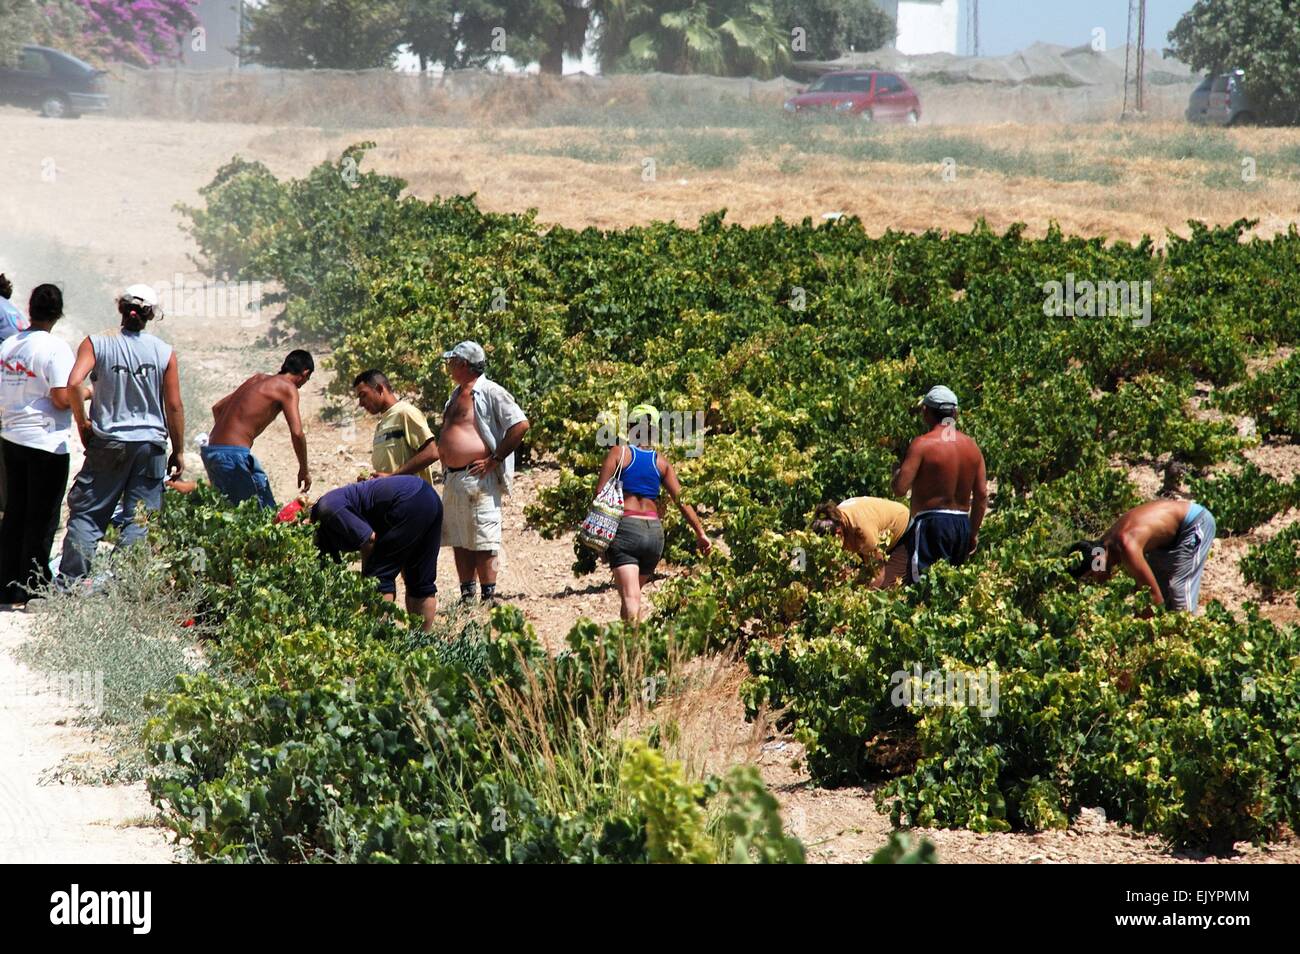 Grape pickers in a vineyard, Montilla, Cordoba Province, Andalusia, Spain, Western Europe. Stock Photo